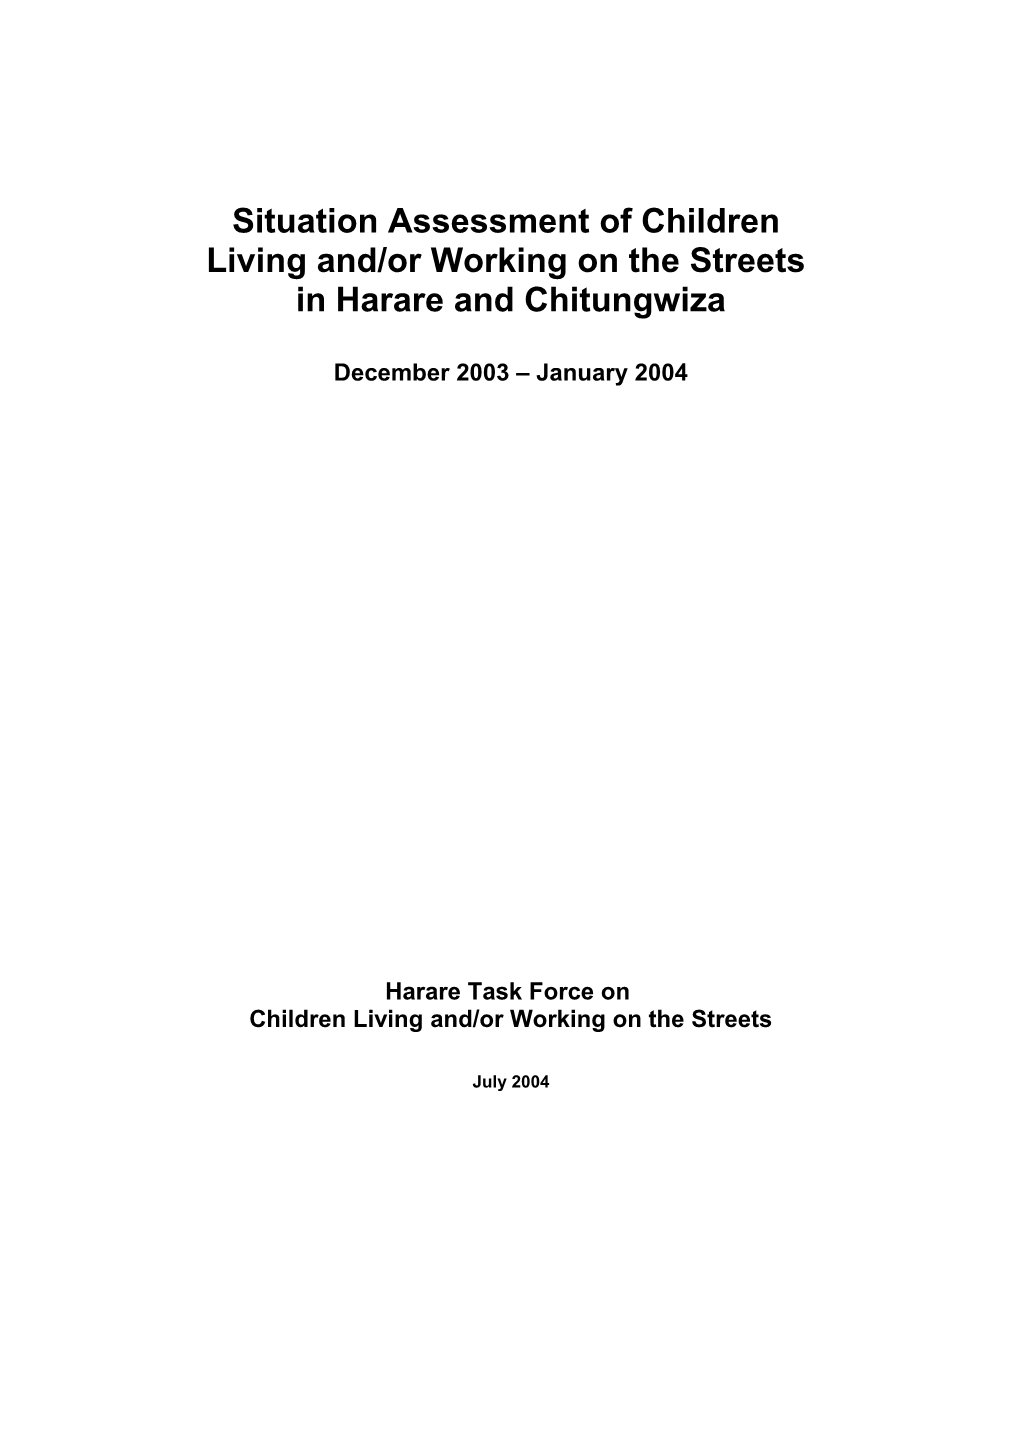 Situation Assessment of Children Living and Working on the Streets